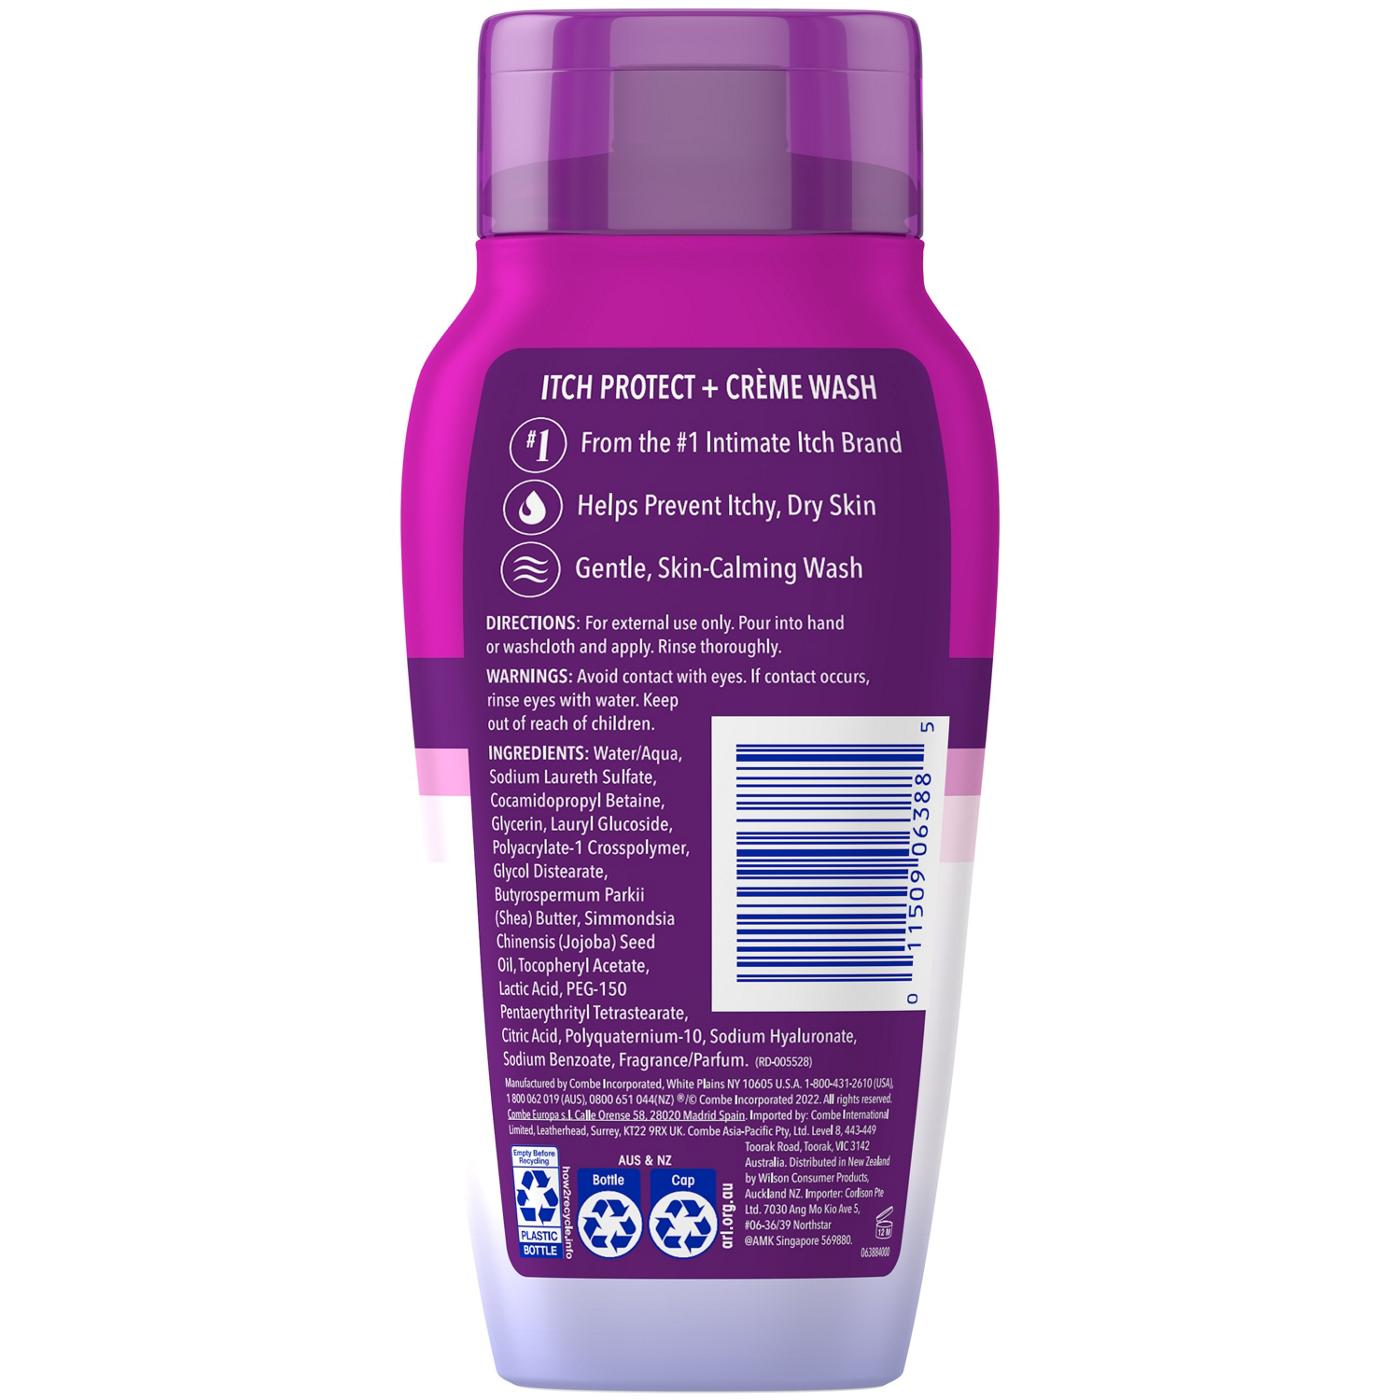 Vagisil Itch Protect+ Daily Creme Wash; image 2 of 2